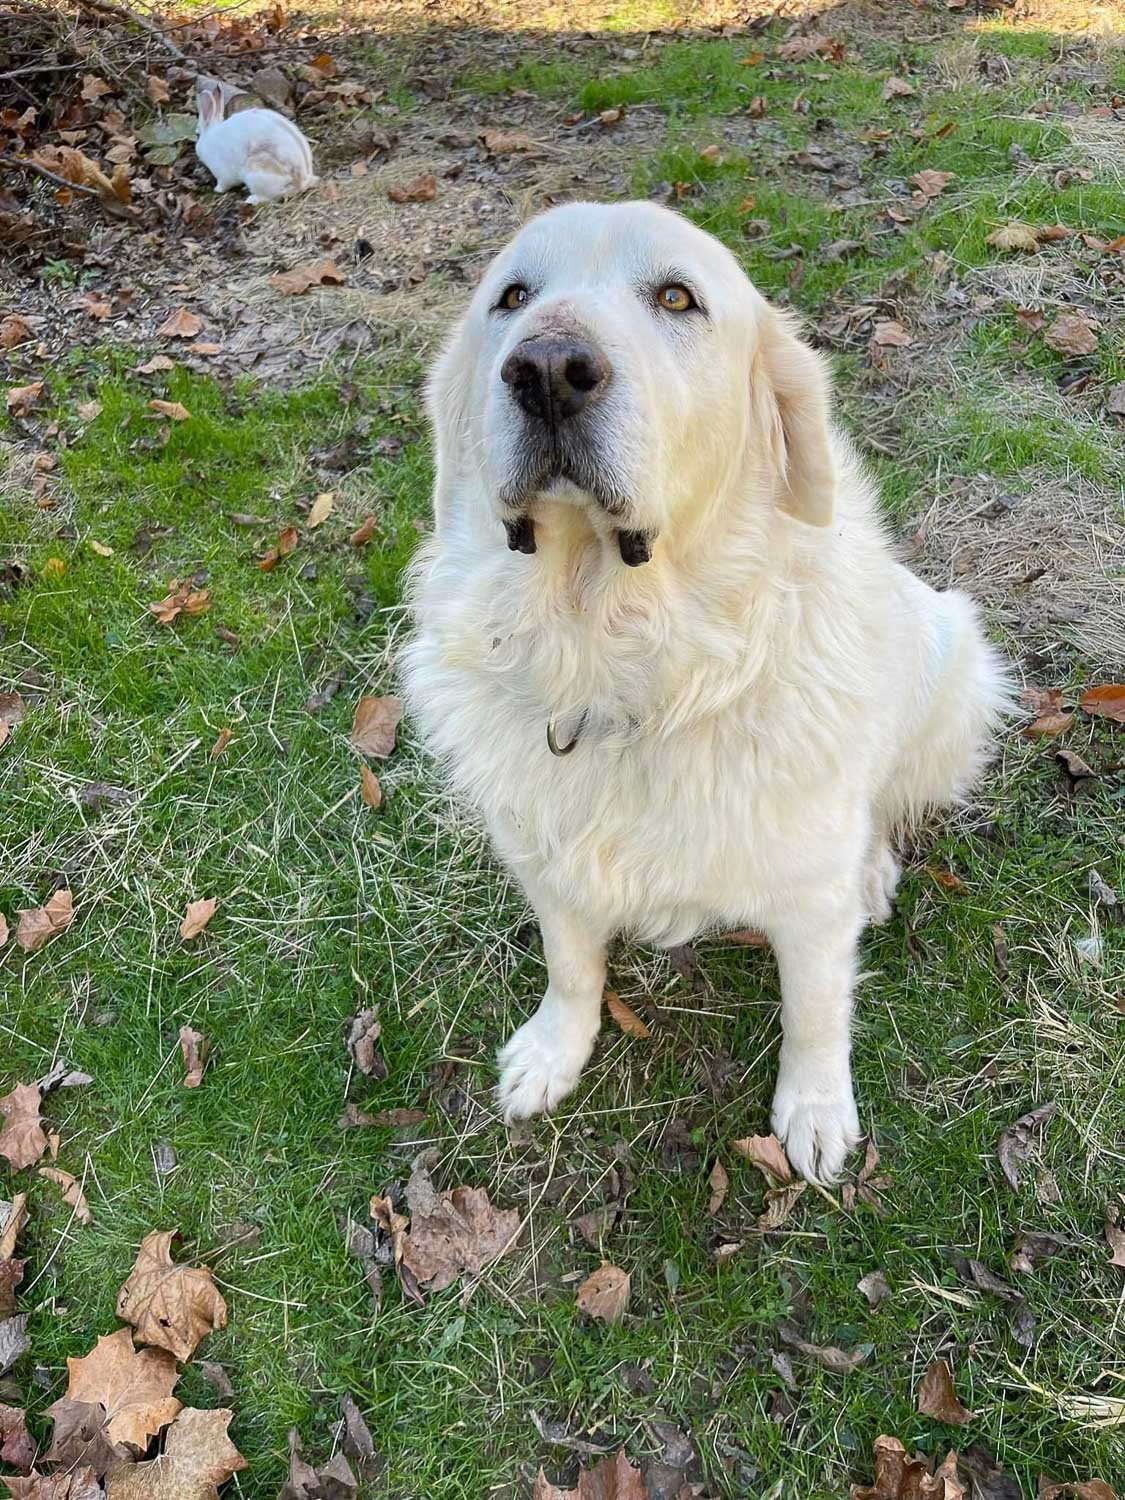 A white Golden Retriever dog sitting outside on the grass looking up